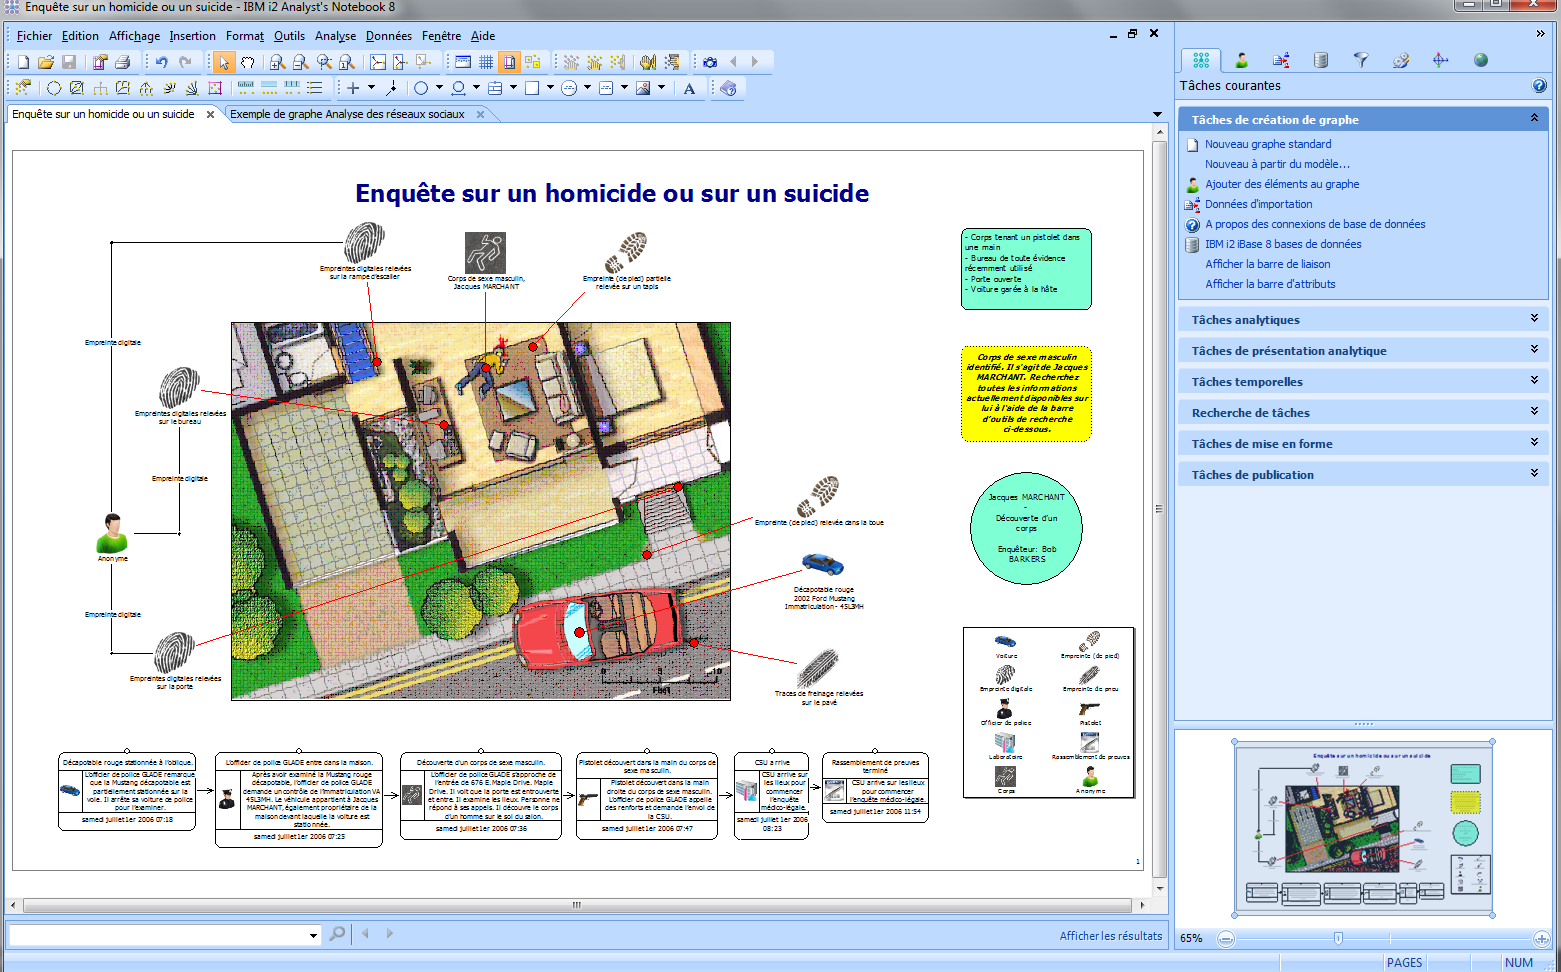 Exemple Analyse Homicide avec IBM i2 Analyst's Notebook